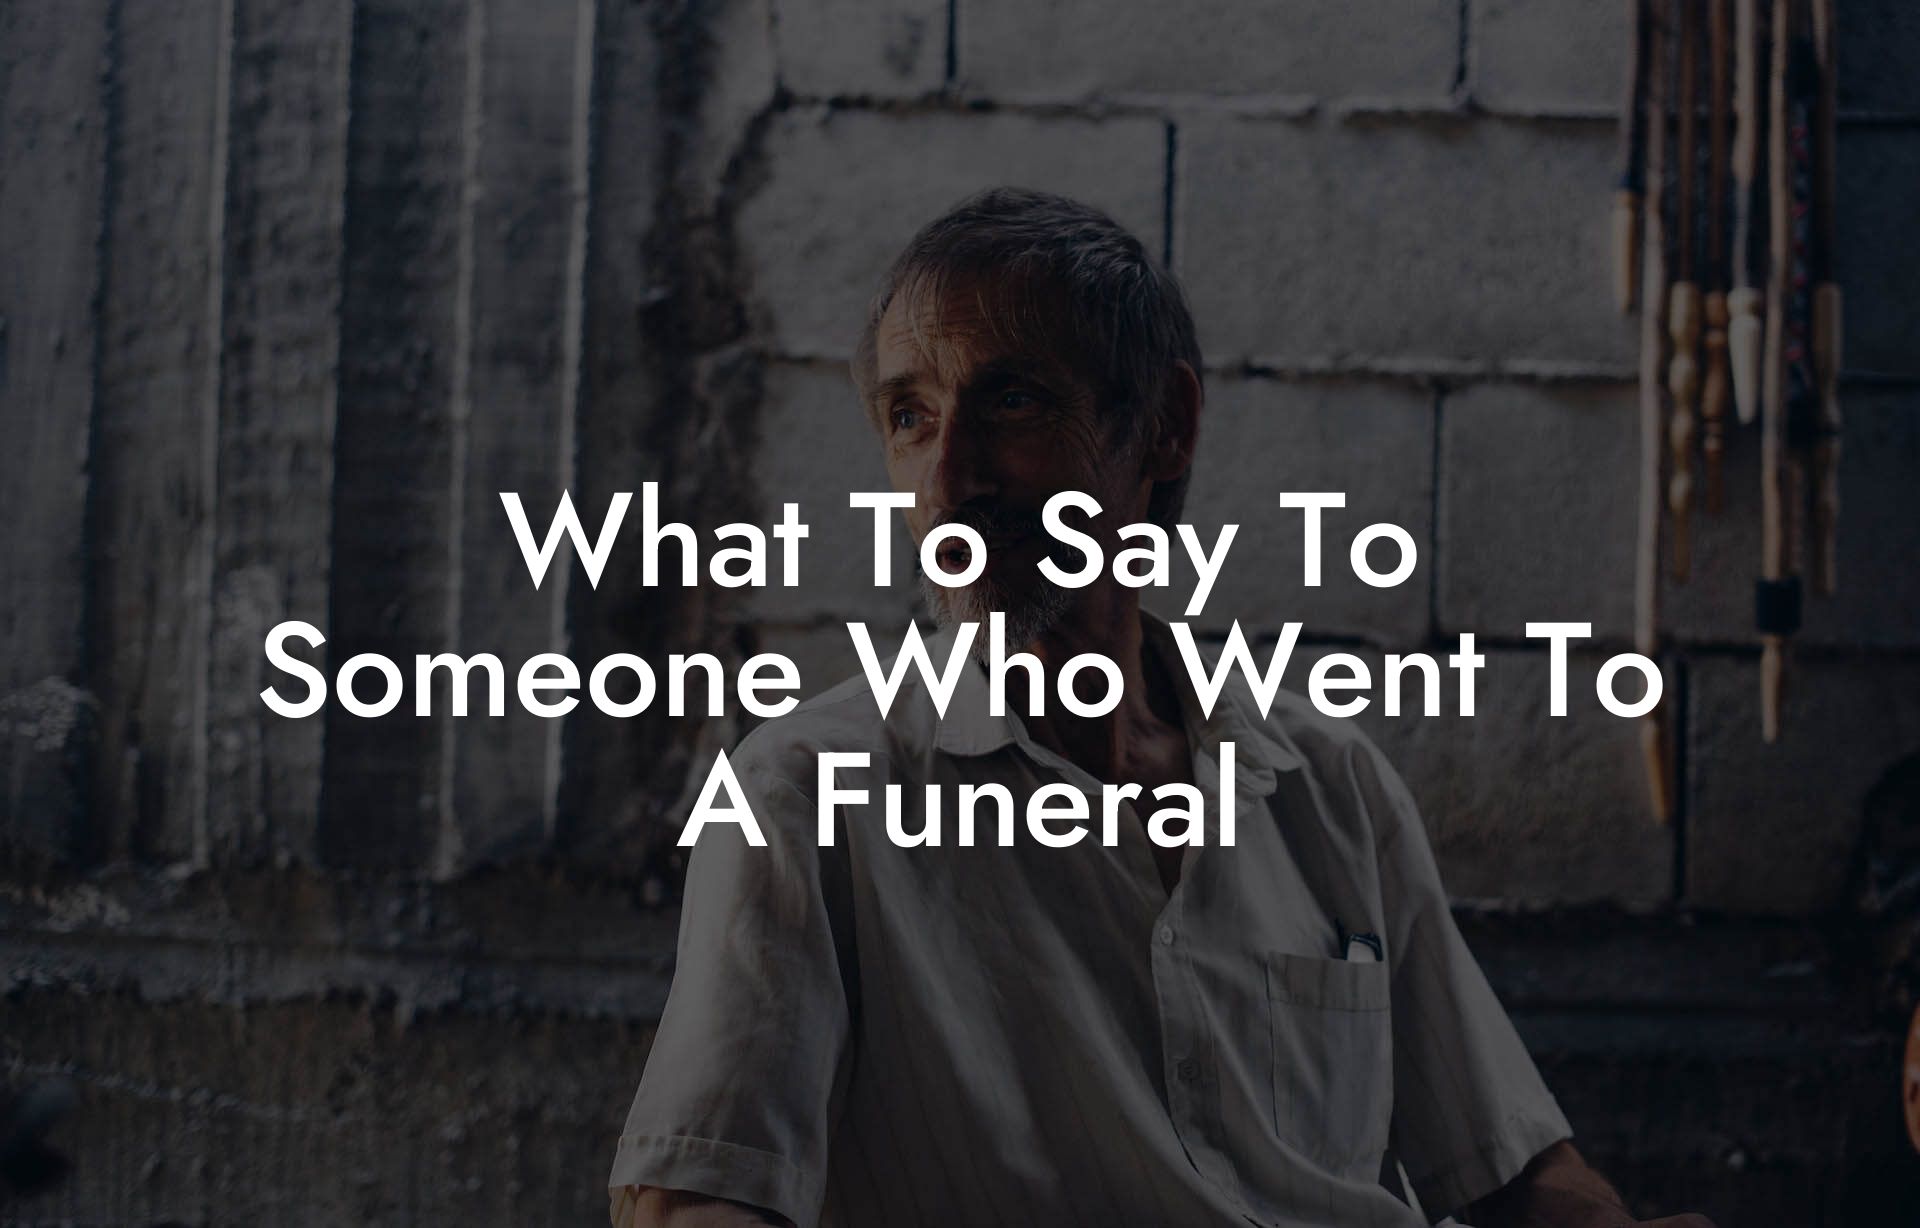 What To Say To Someone Who Went To A Funeral